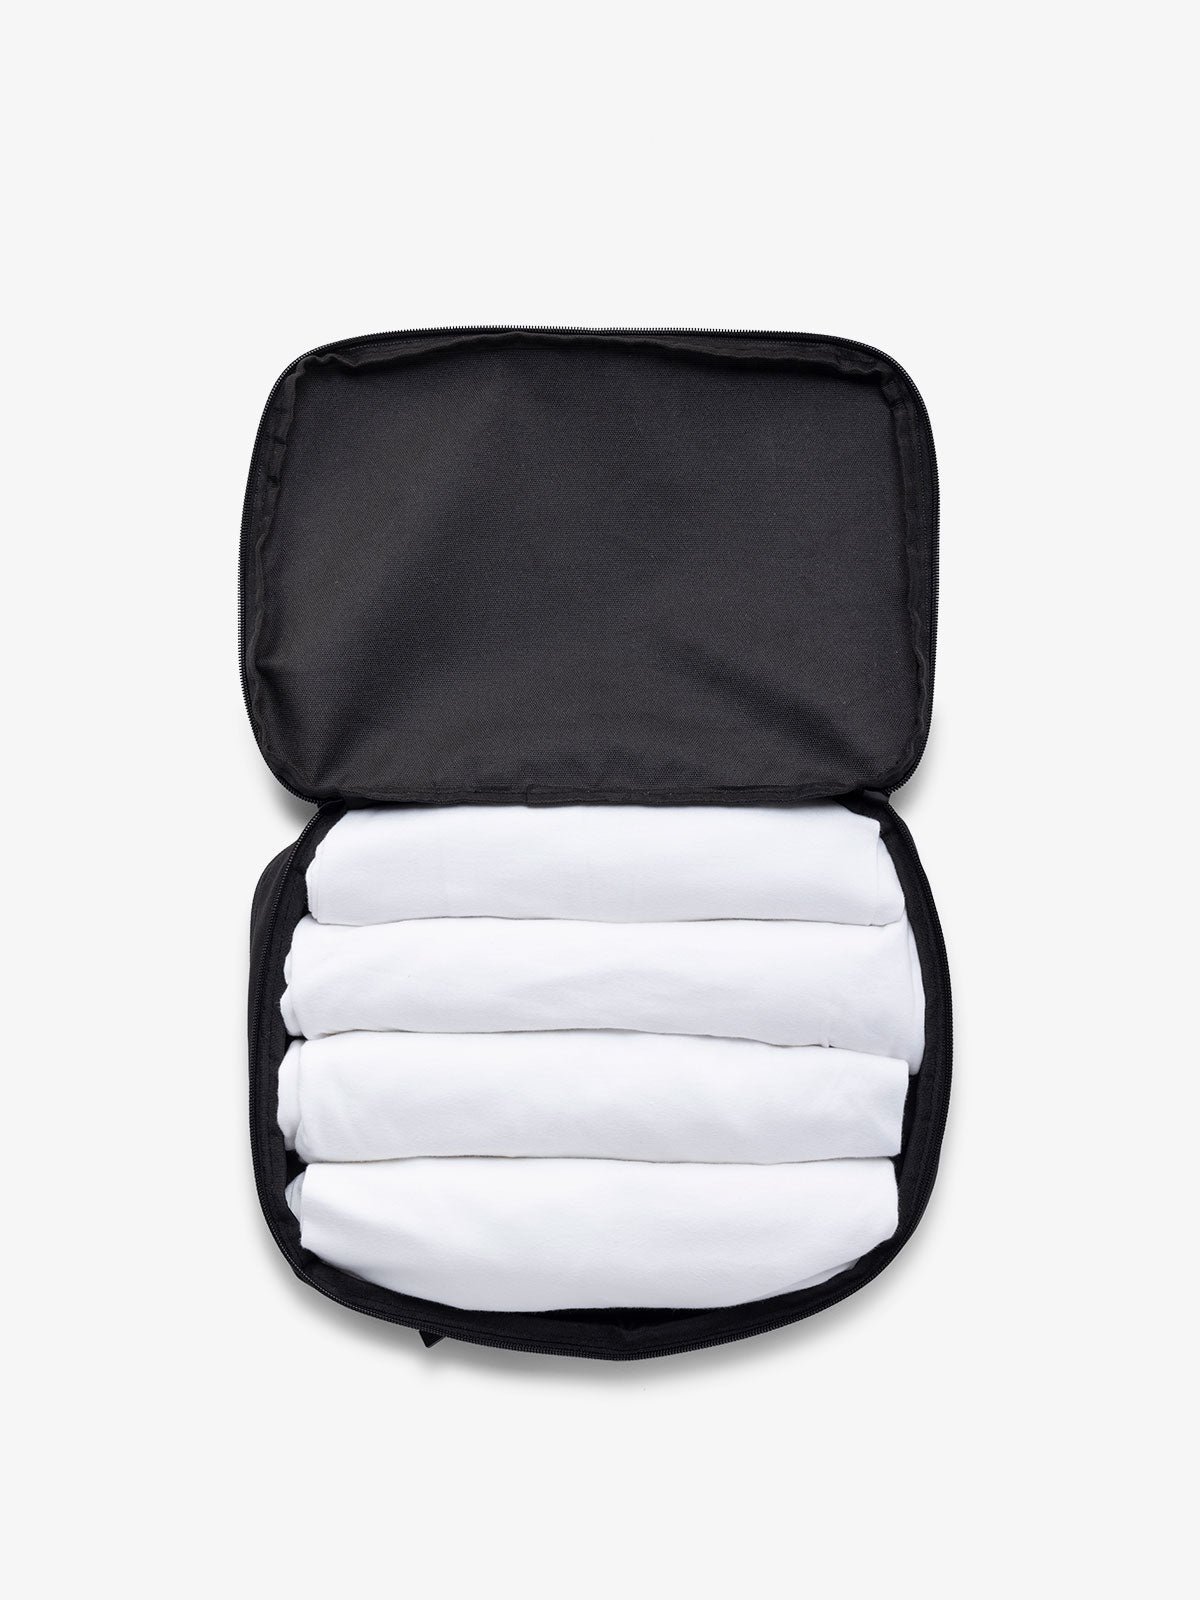 lightweight packing cubes with compression for travel